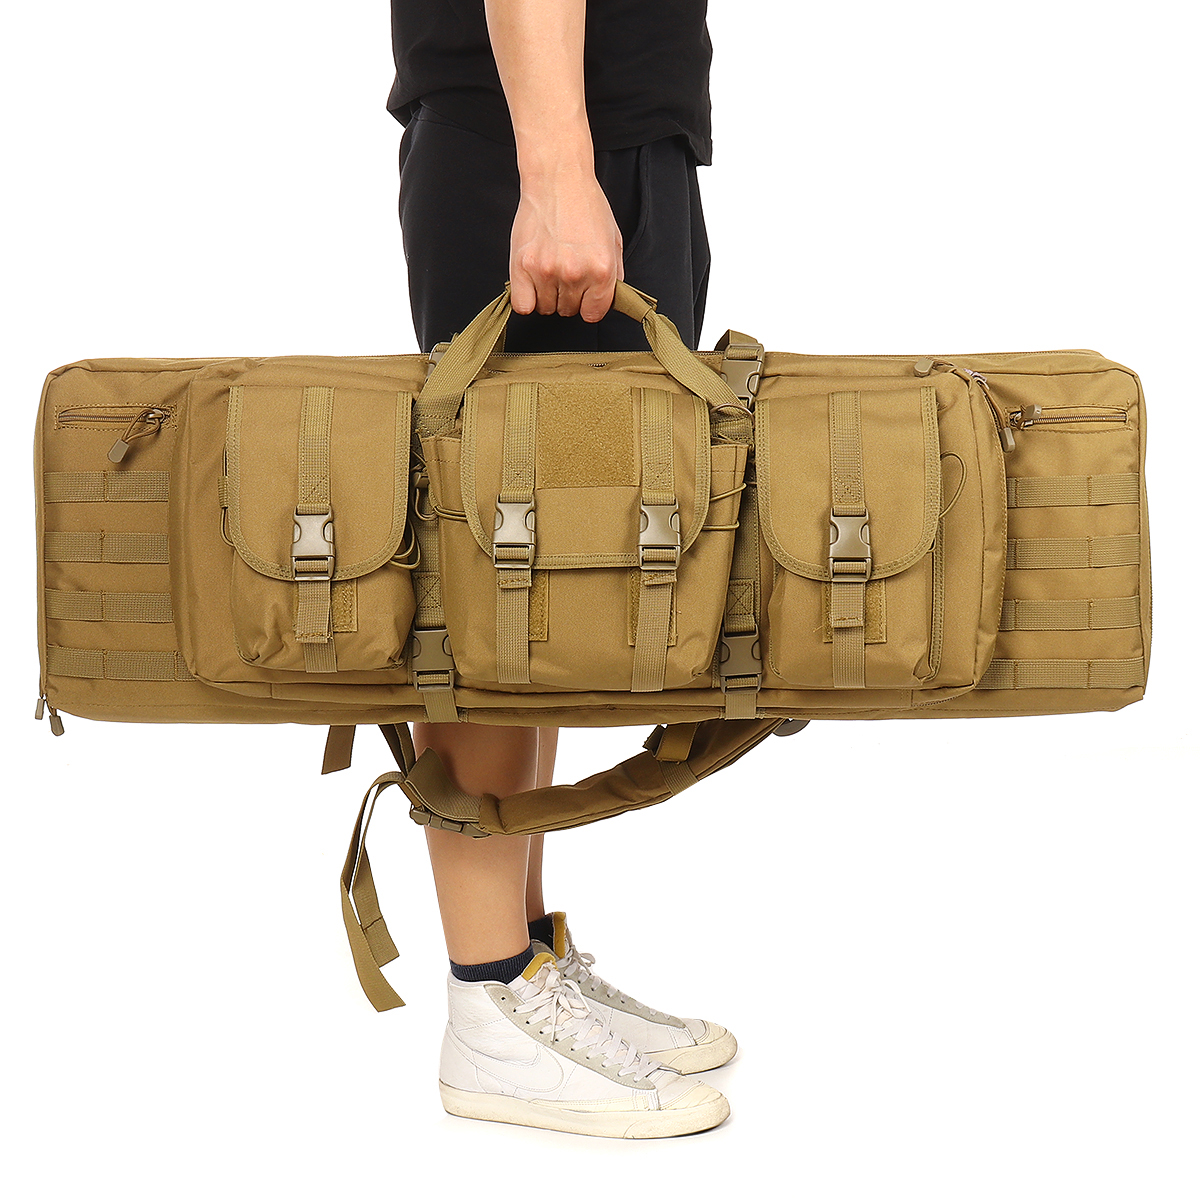 36inch-Tactical-Camouflage-Fishing-Tackle-Camping-Bag-Multifunctional-Storage-Bag-Double-Padded-Back-1853242-8